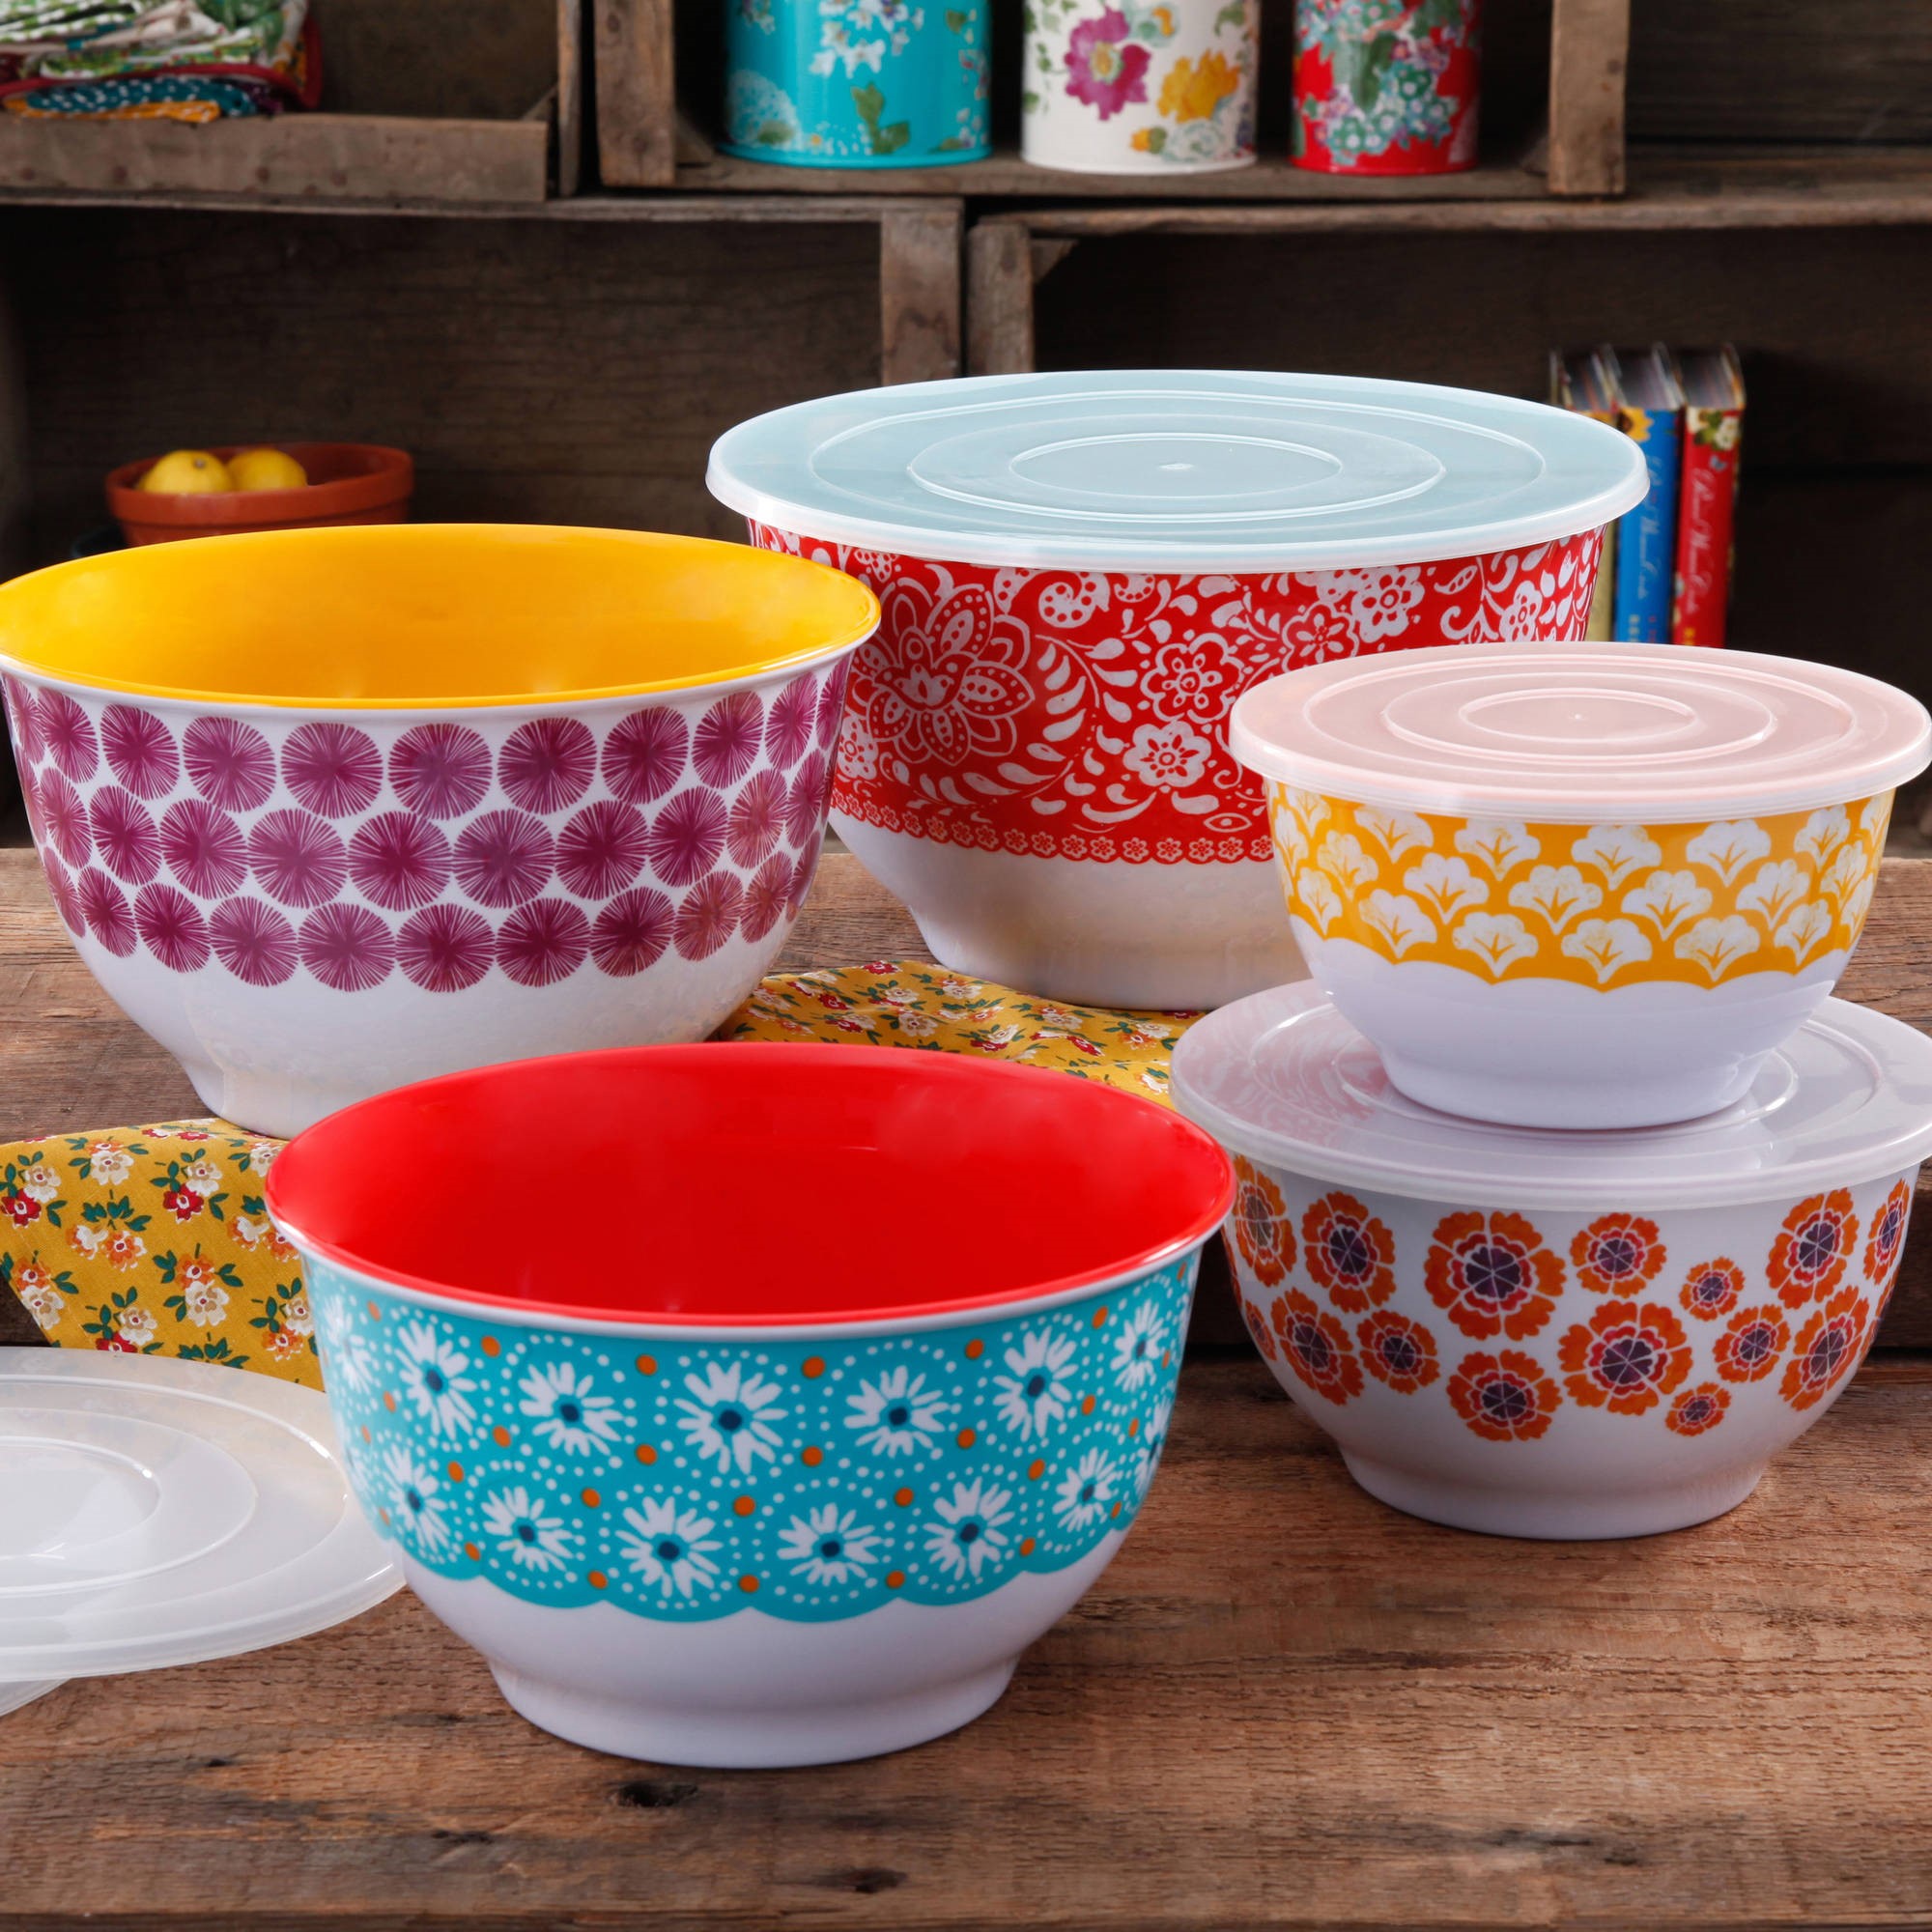 The Pioneer Woman Traveling Vines Melamine Mixing Bowl Set, 10-Piece Set - image 1 of 8